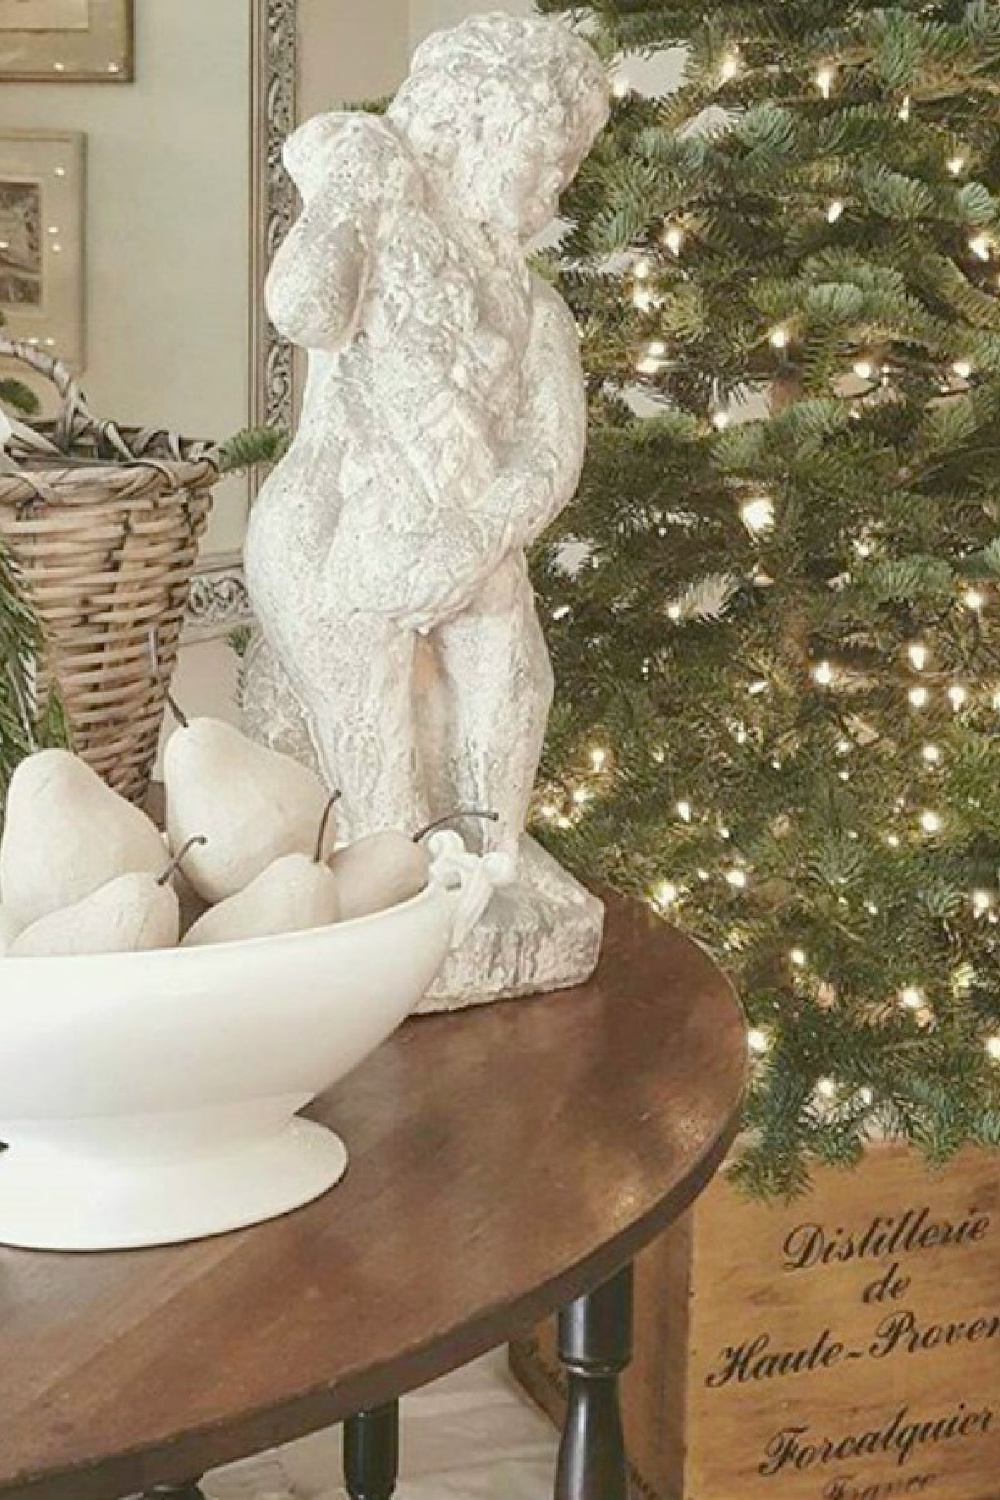 White bowl of pears on an elegant table near Christmas tree in a French country home with white sophisticated details and greenery - The French Nest Co Interior Design. #frenchcountry #frenchchristmas #christmasdecor #whitechristmasdecor